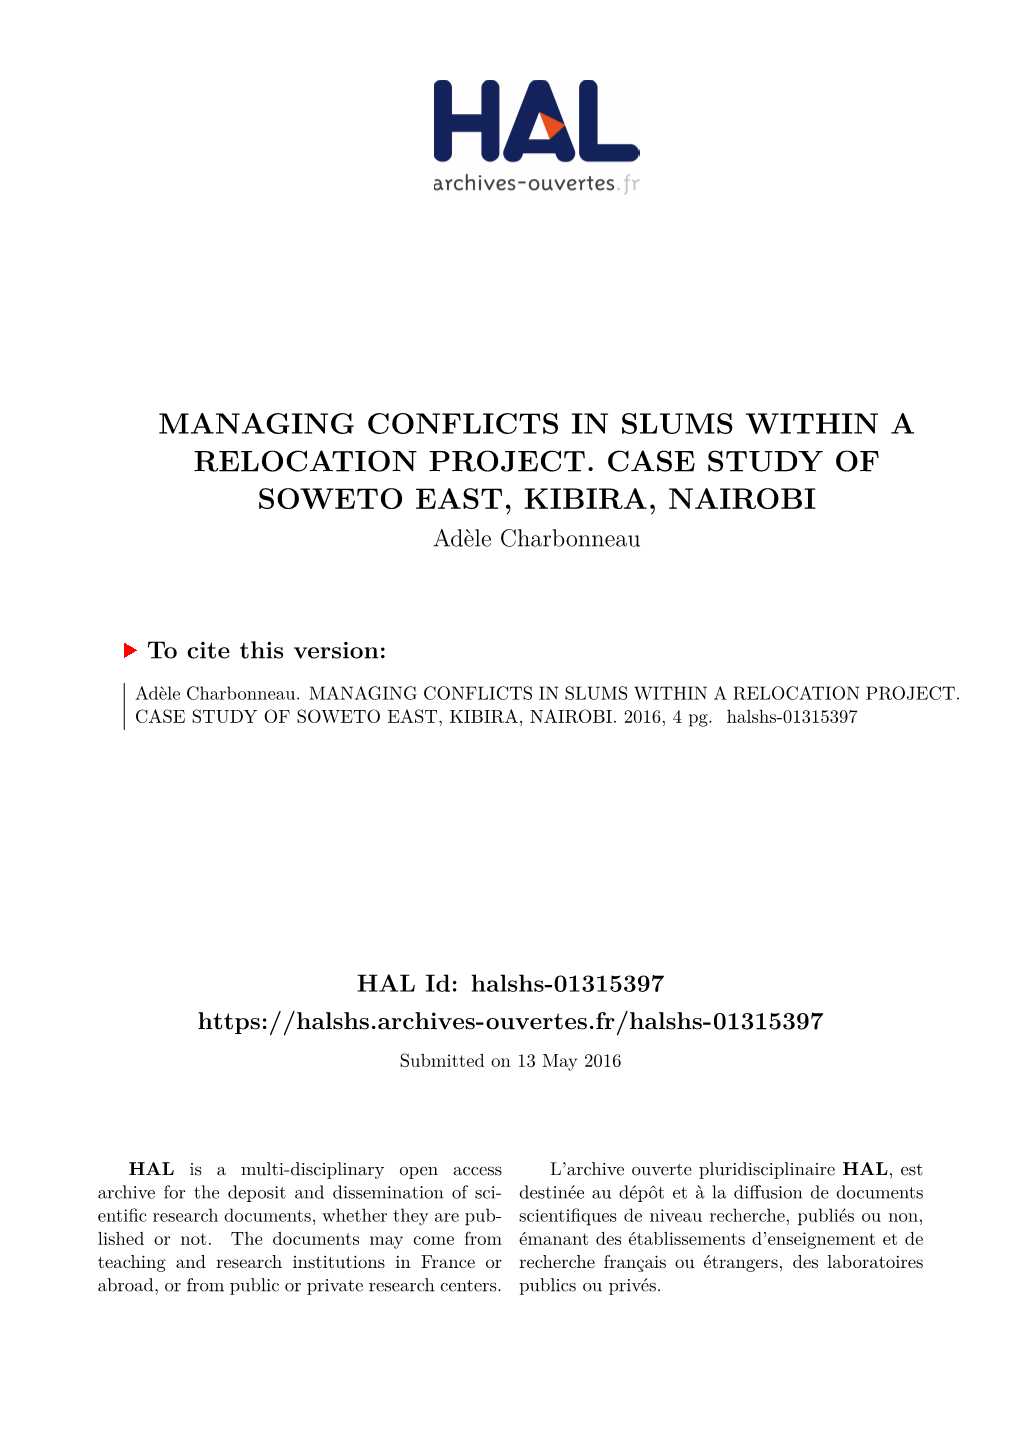 MANAGING CONFLICTS in SLUMS WITHIN a RELOCATION PROJECT. CASE STUDY of SOWETO EAST, KIBIRA, NAIROBI Adèle Charbonneau